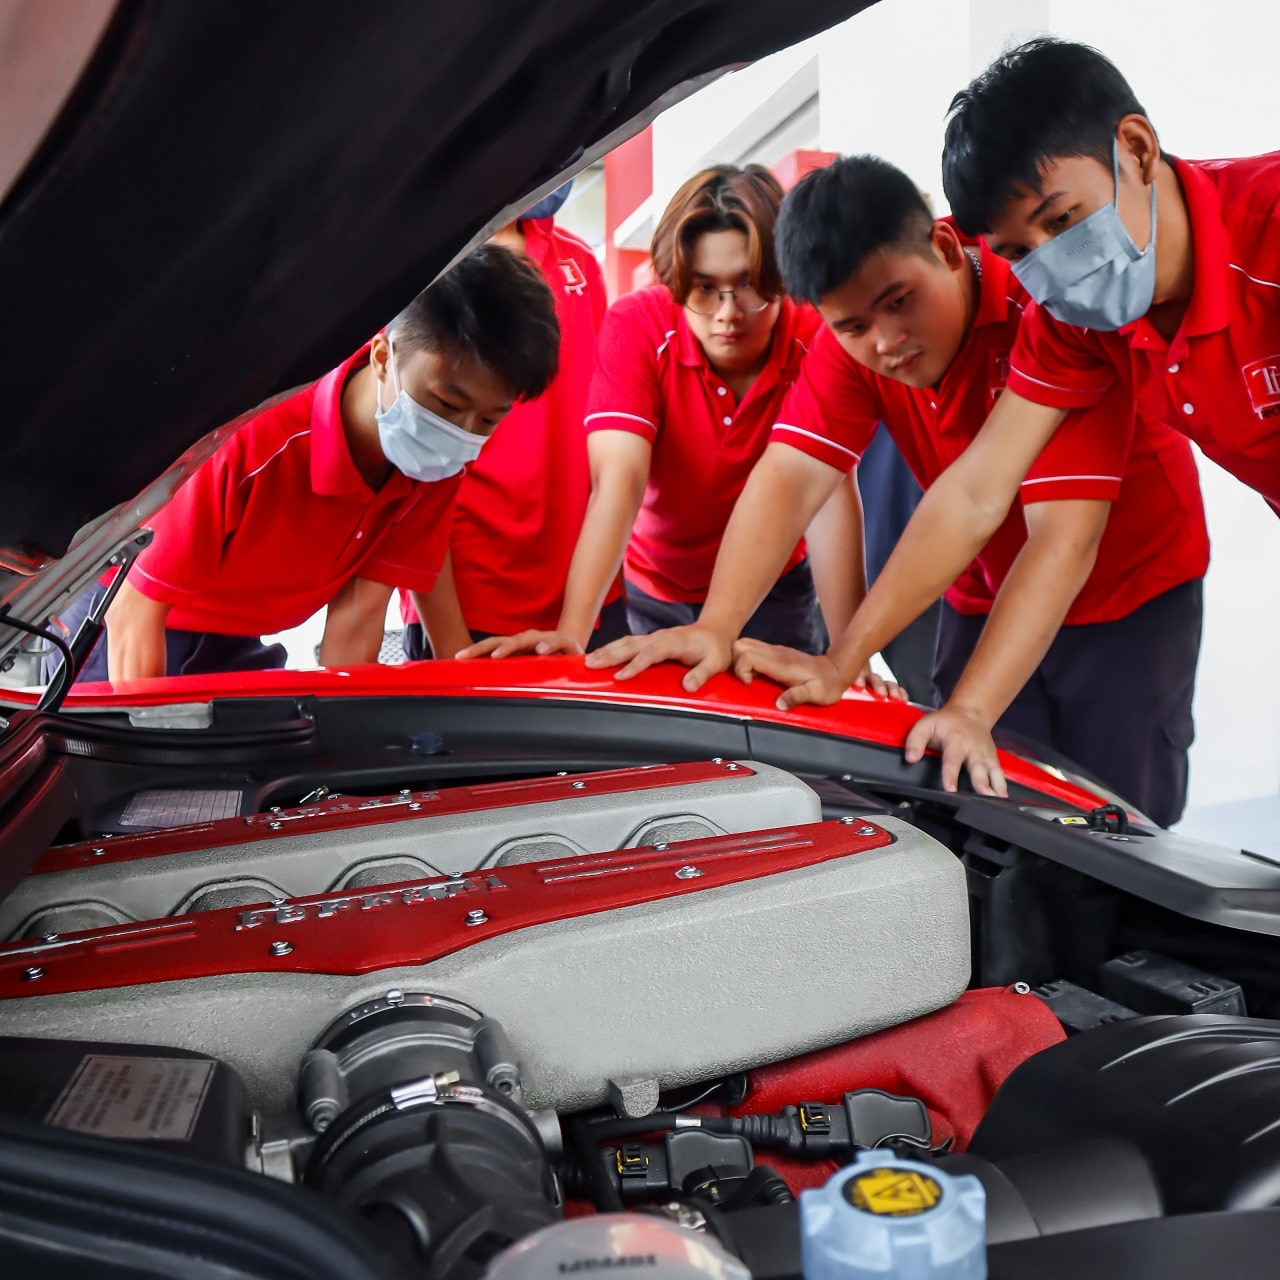 ﻿diploma in automotive technology by Techtra Automotive Academy Techtra Automotive Academy (Diploma in Automotive Technology) Best Auto College in Malaysia Kuala Lumpur) 2022-2023 Automotive Technology Academy Study Diploma in Malaysia KL Kuala Lumpur - Techtra Automotive College in Malaysia